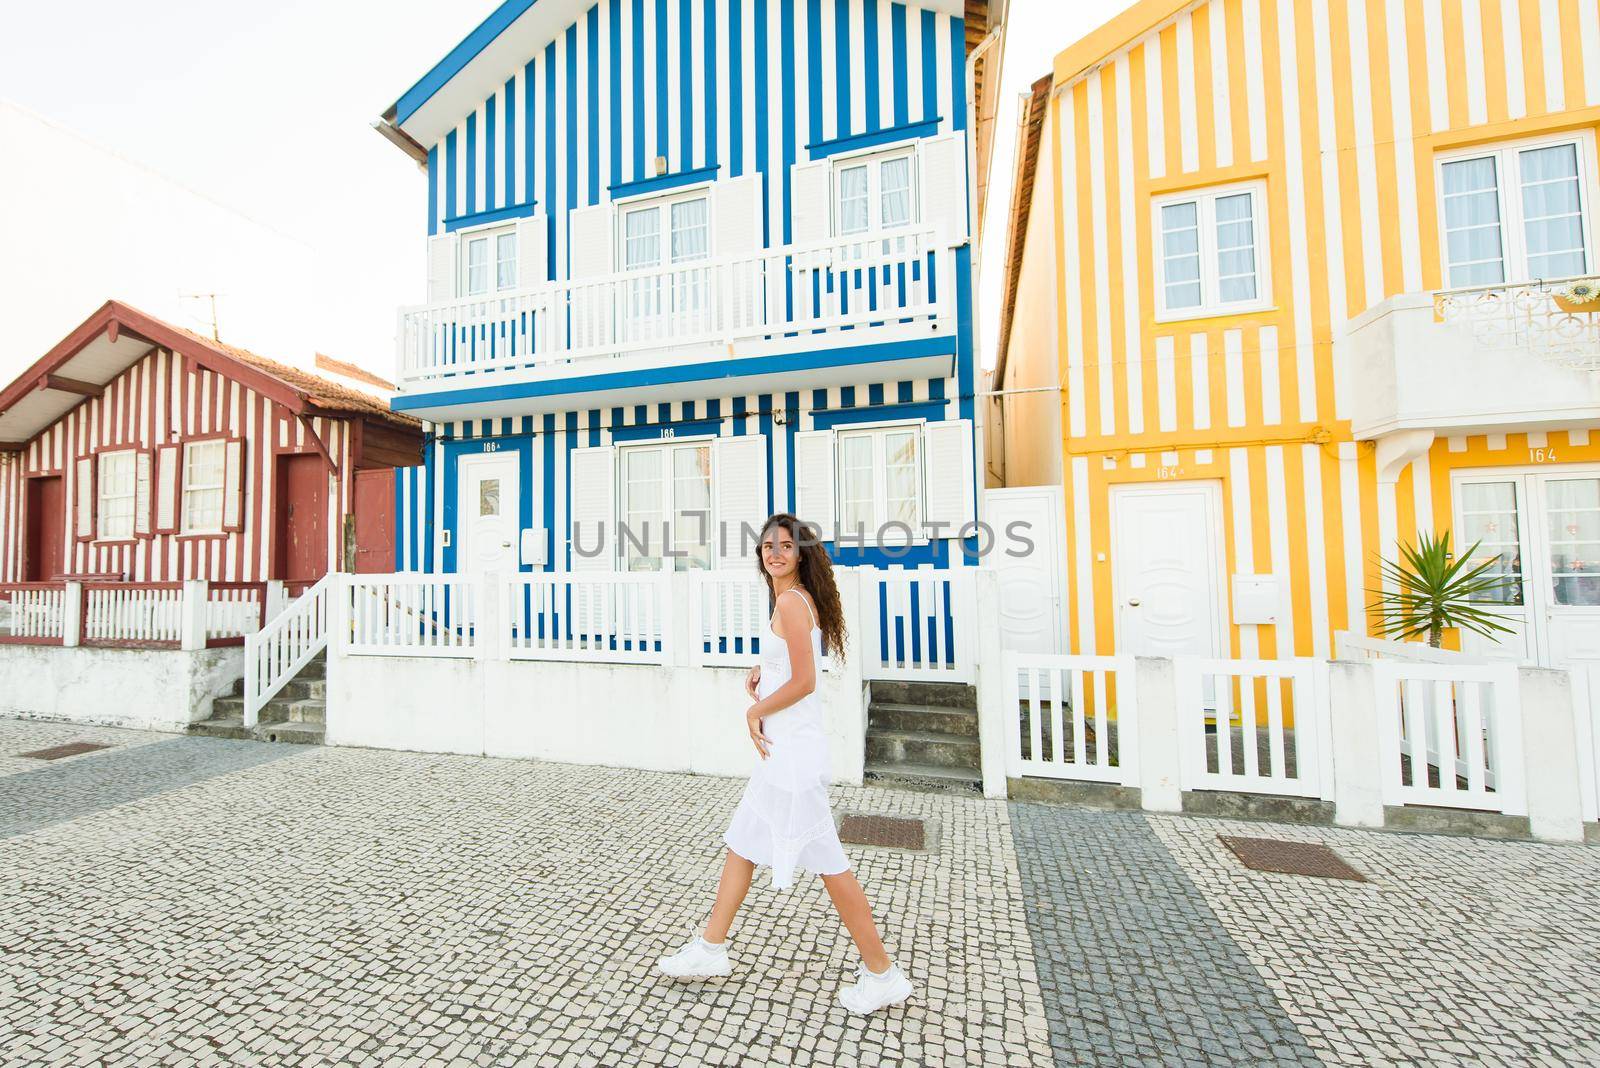 Young girl in white dress walks around street in Aveiro, Portugal near colourful and peaceful houses. Lifestyle.